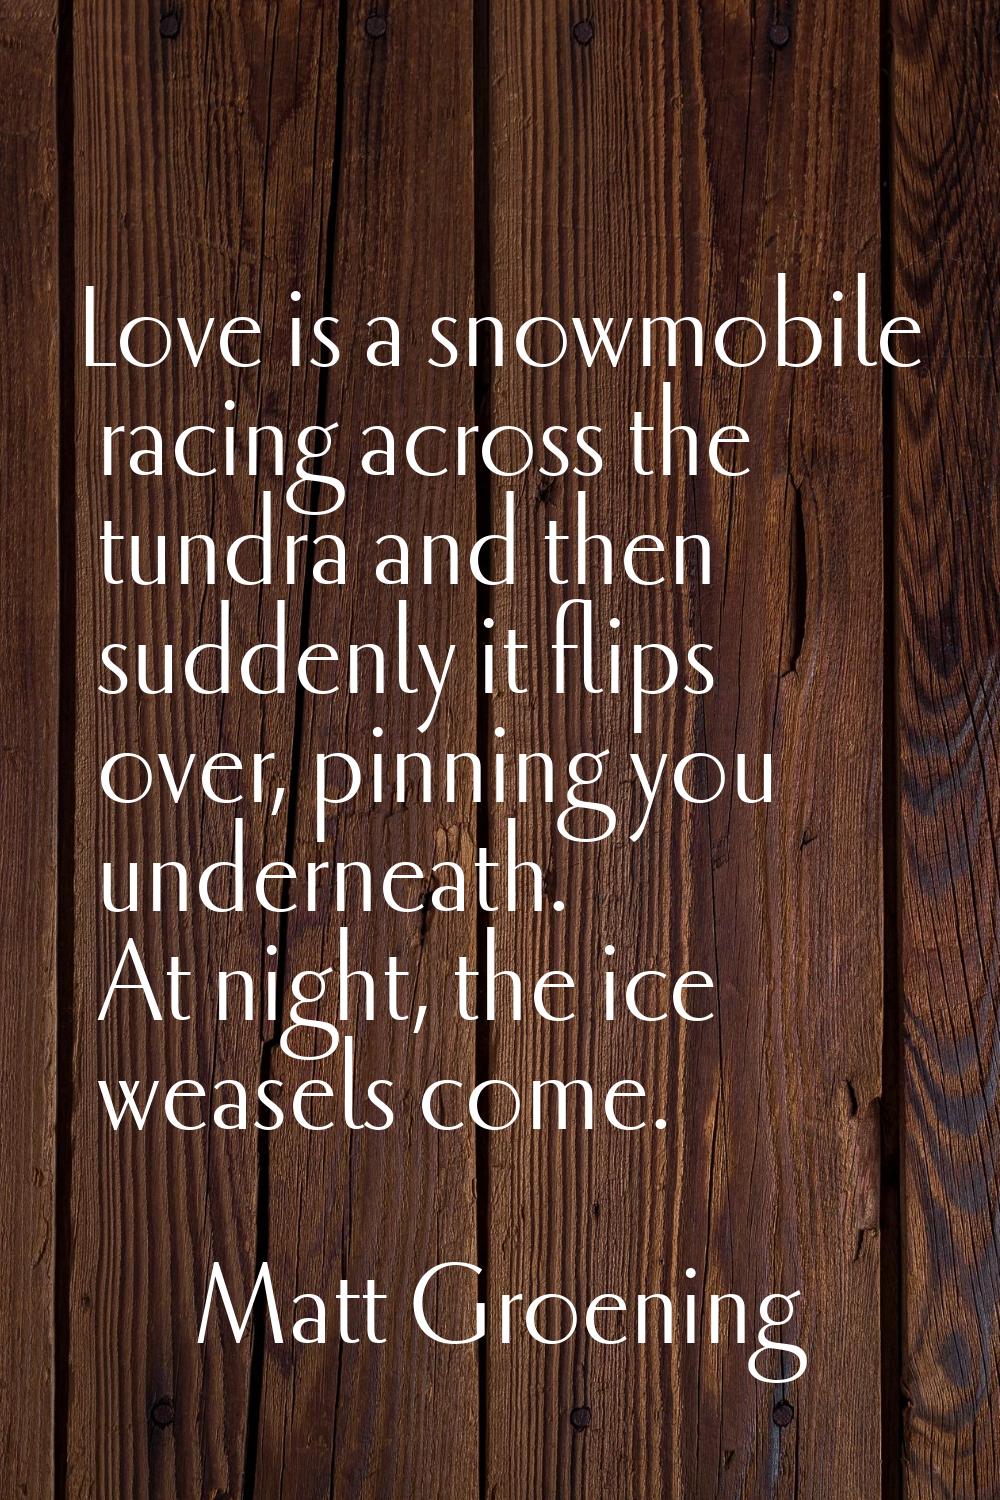 Love is a snowmobile racing across the tundra and then suddenly it flips over, pinning you undernea